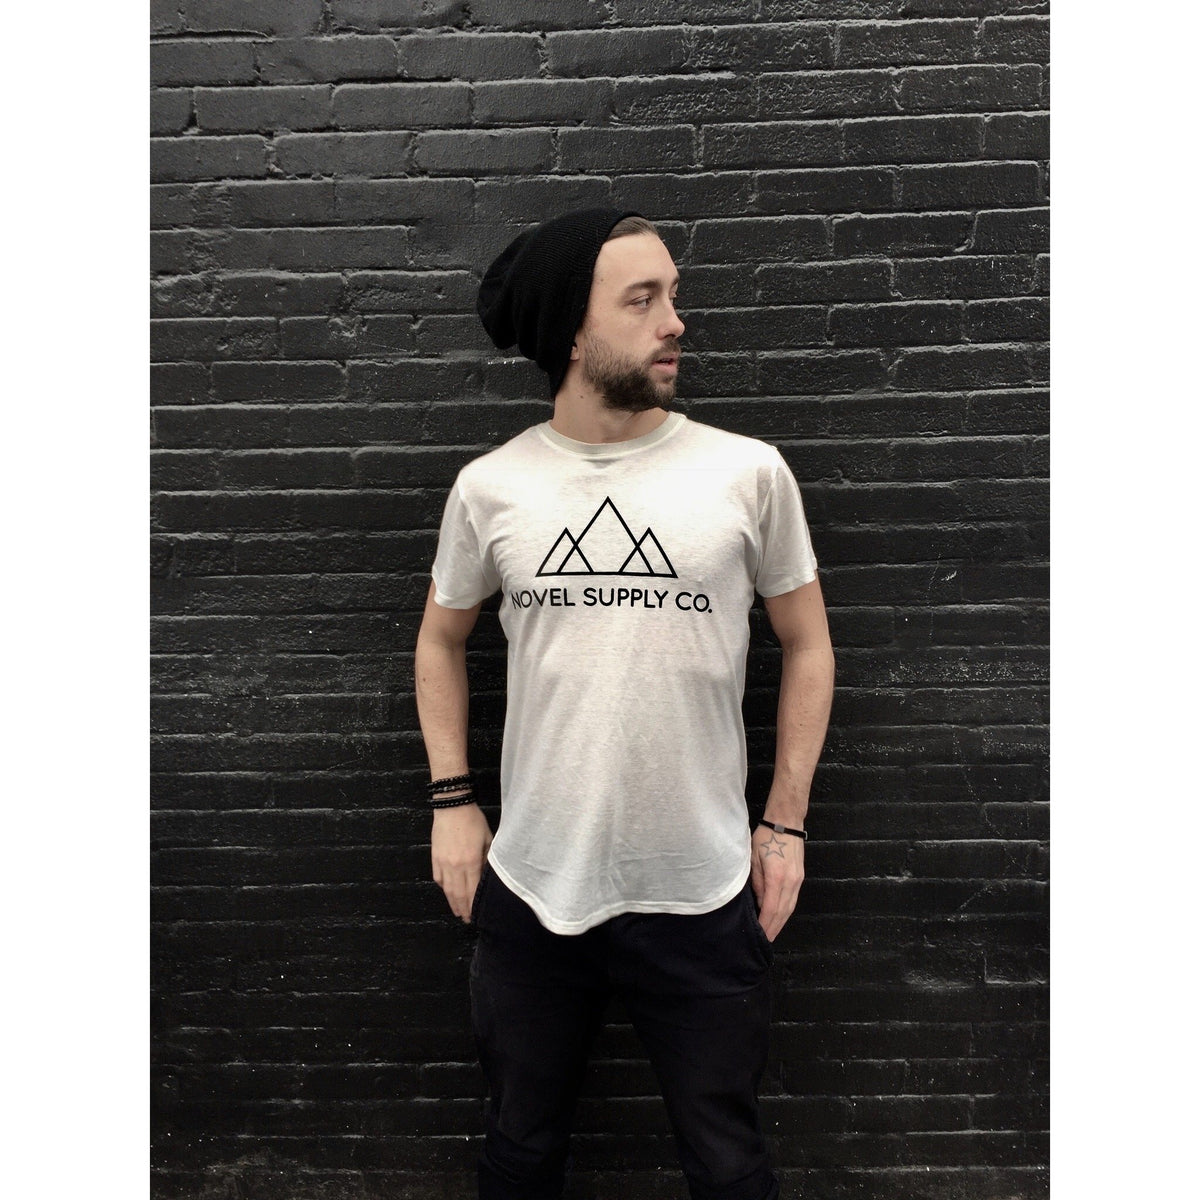 made in vancouver organic cotton sustainable tee